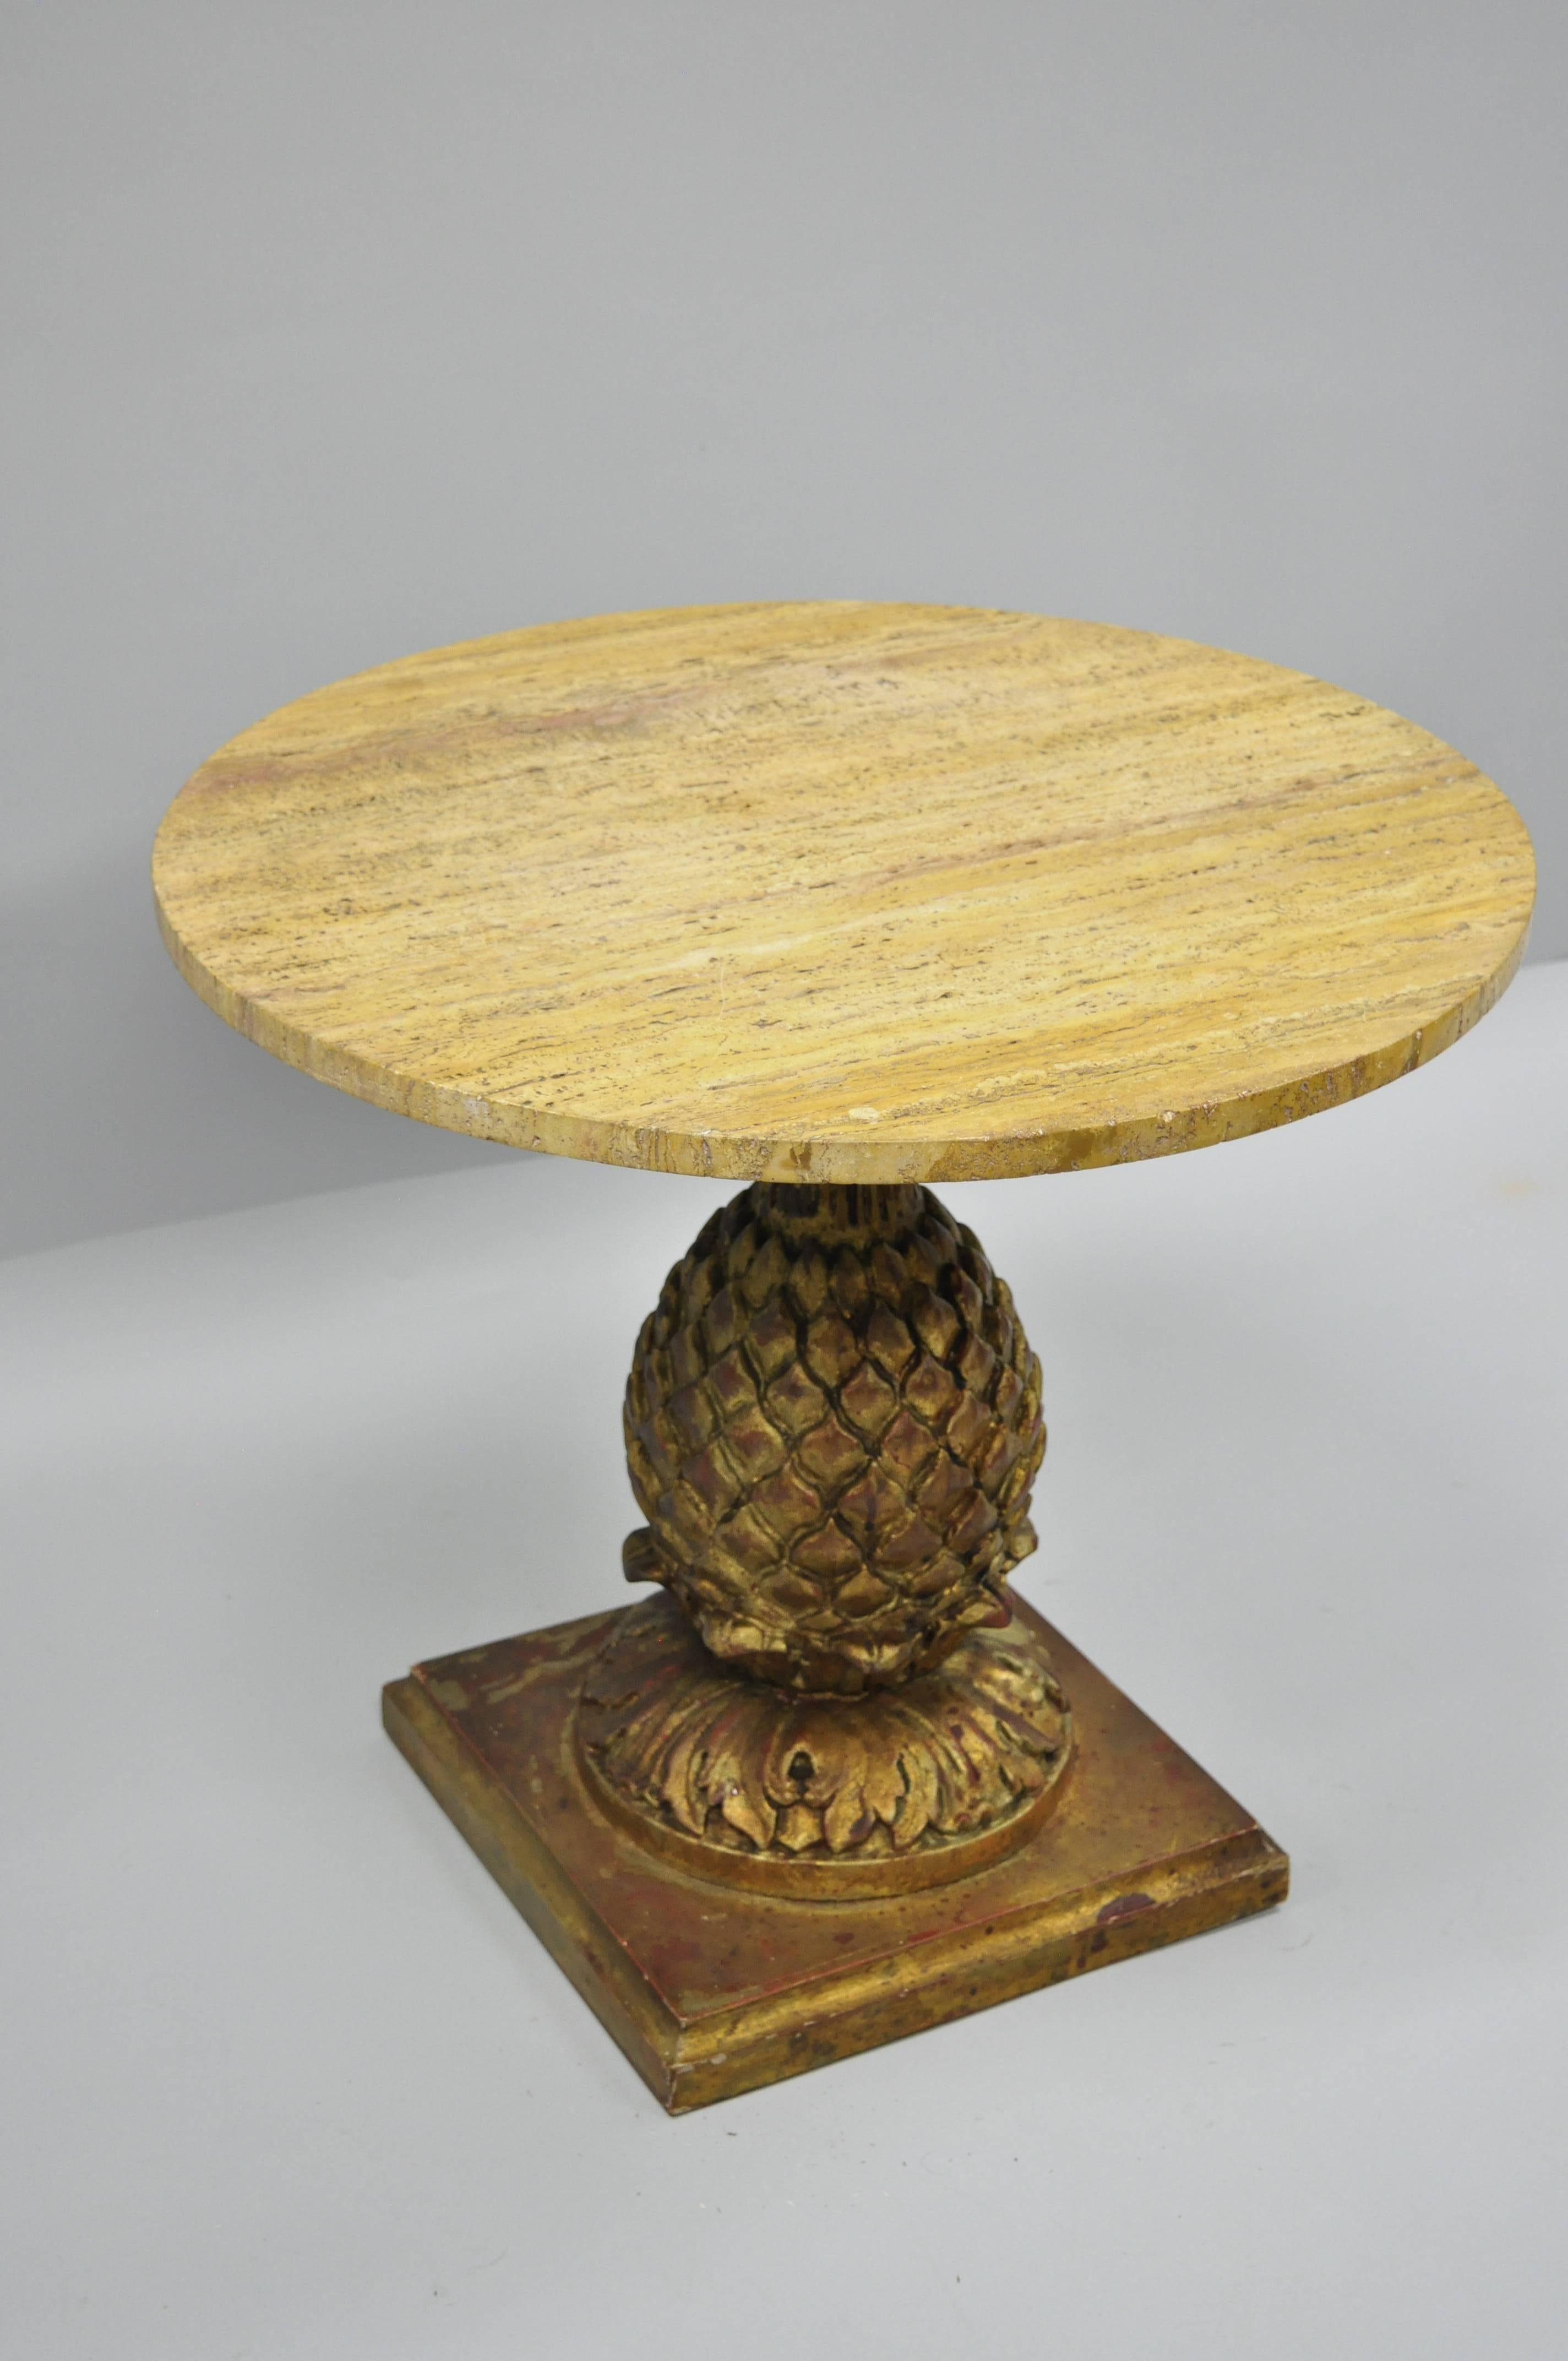 Hand-Carved Italian Hollywood Regency Giltwood Carved Pineapple Travertine Top Side Table